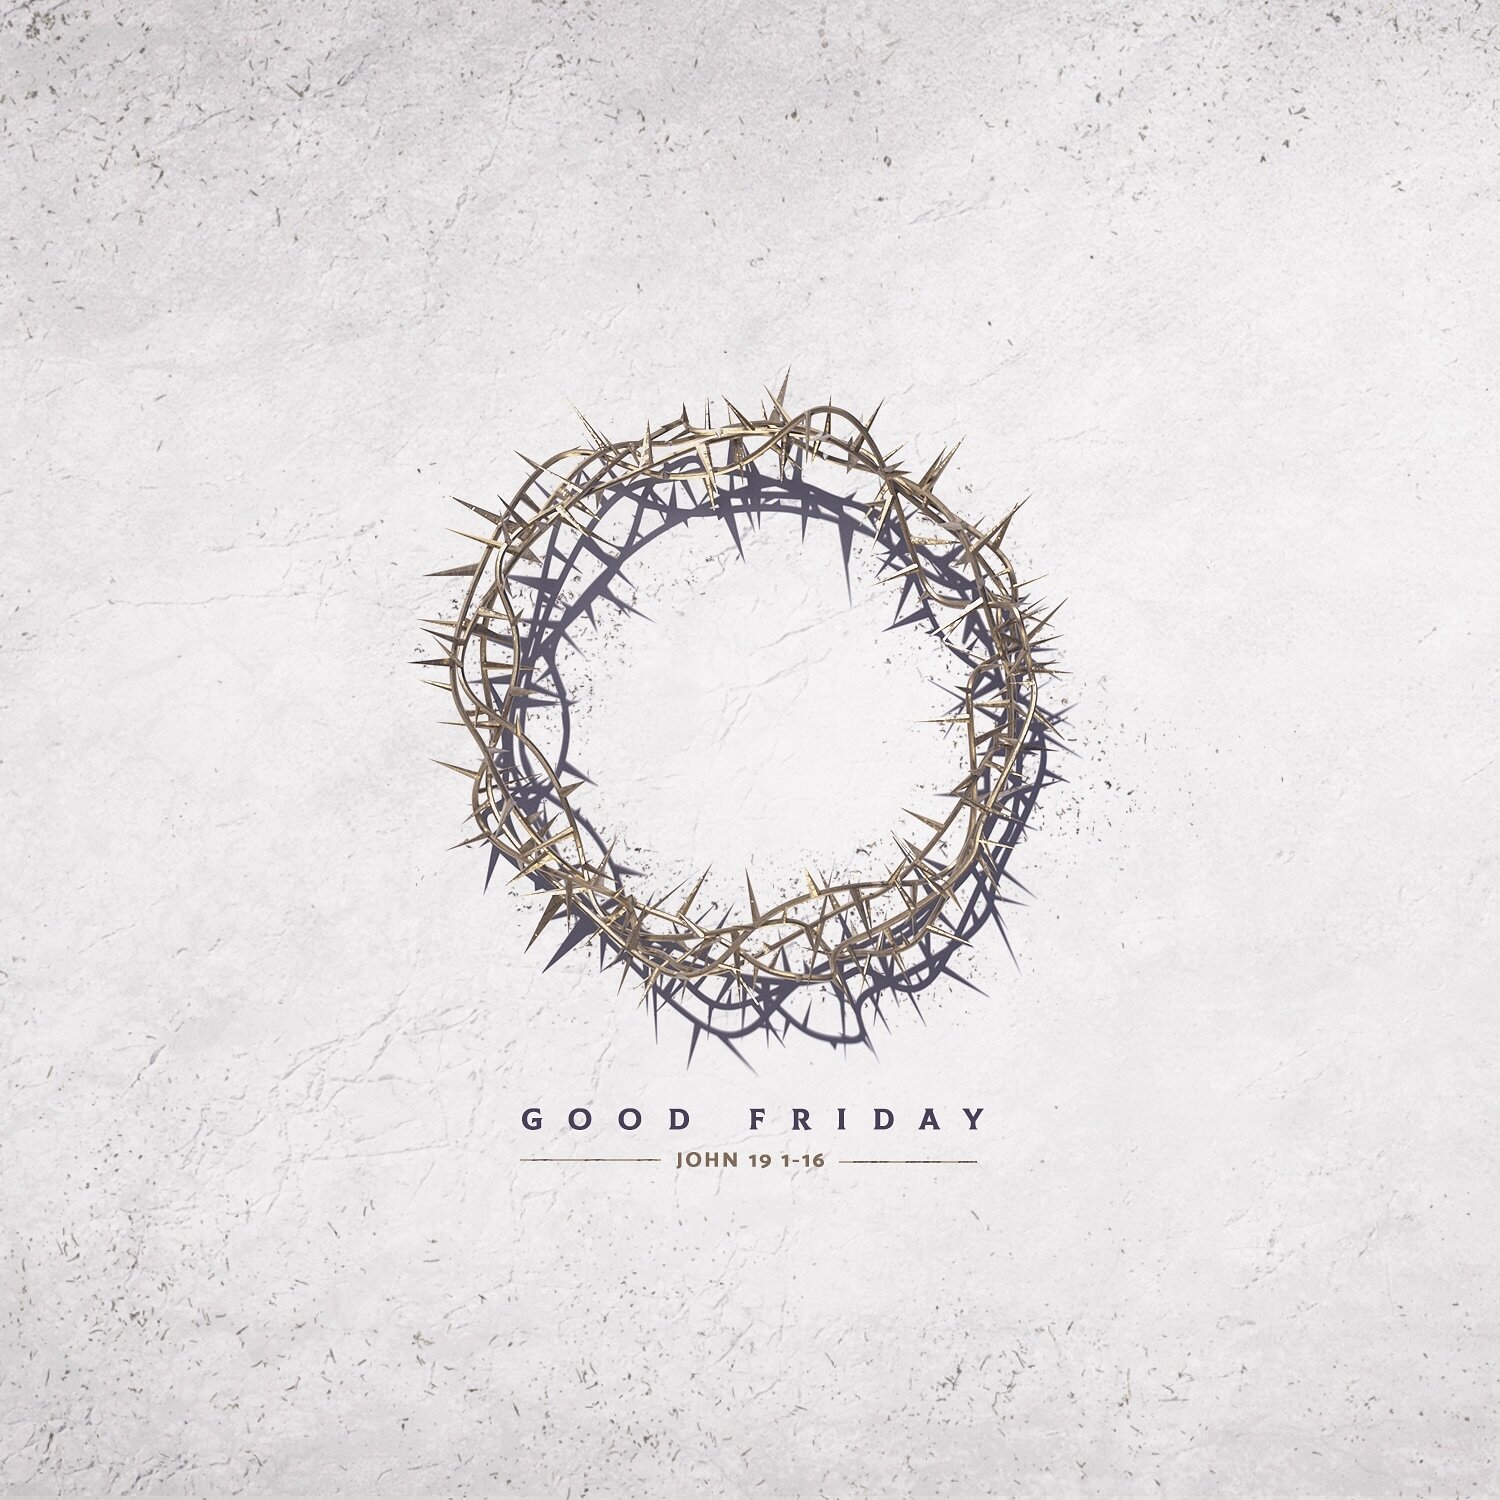 Please join us this Friday morning for our Good Friday gathering to focus on the cross. Invite your family and friends. All are welcome!

🗓️ Friday, March 29th @ 9:30am
📍 Landmark Theatre (2064 Aurora Blvd, Regina)

🔗 compassregina.com/good-friday